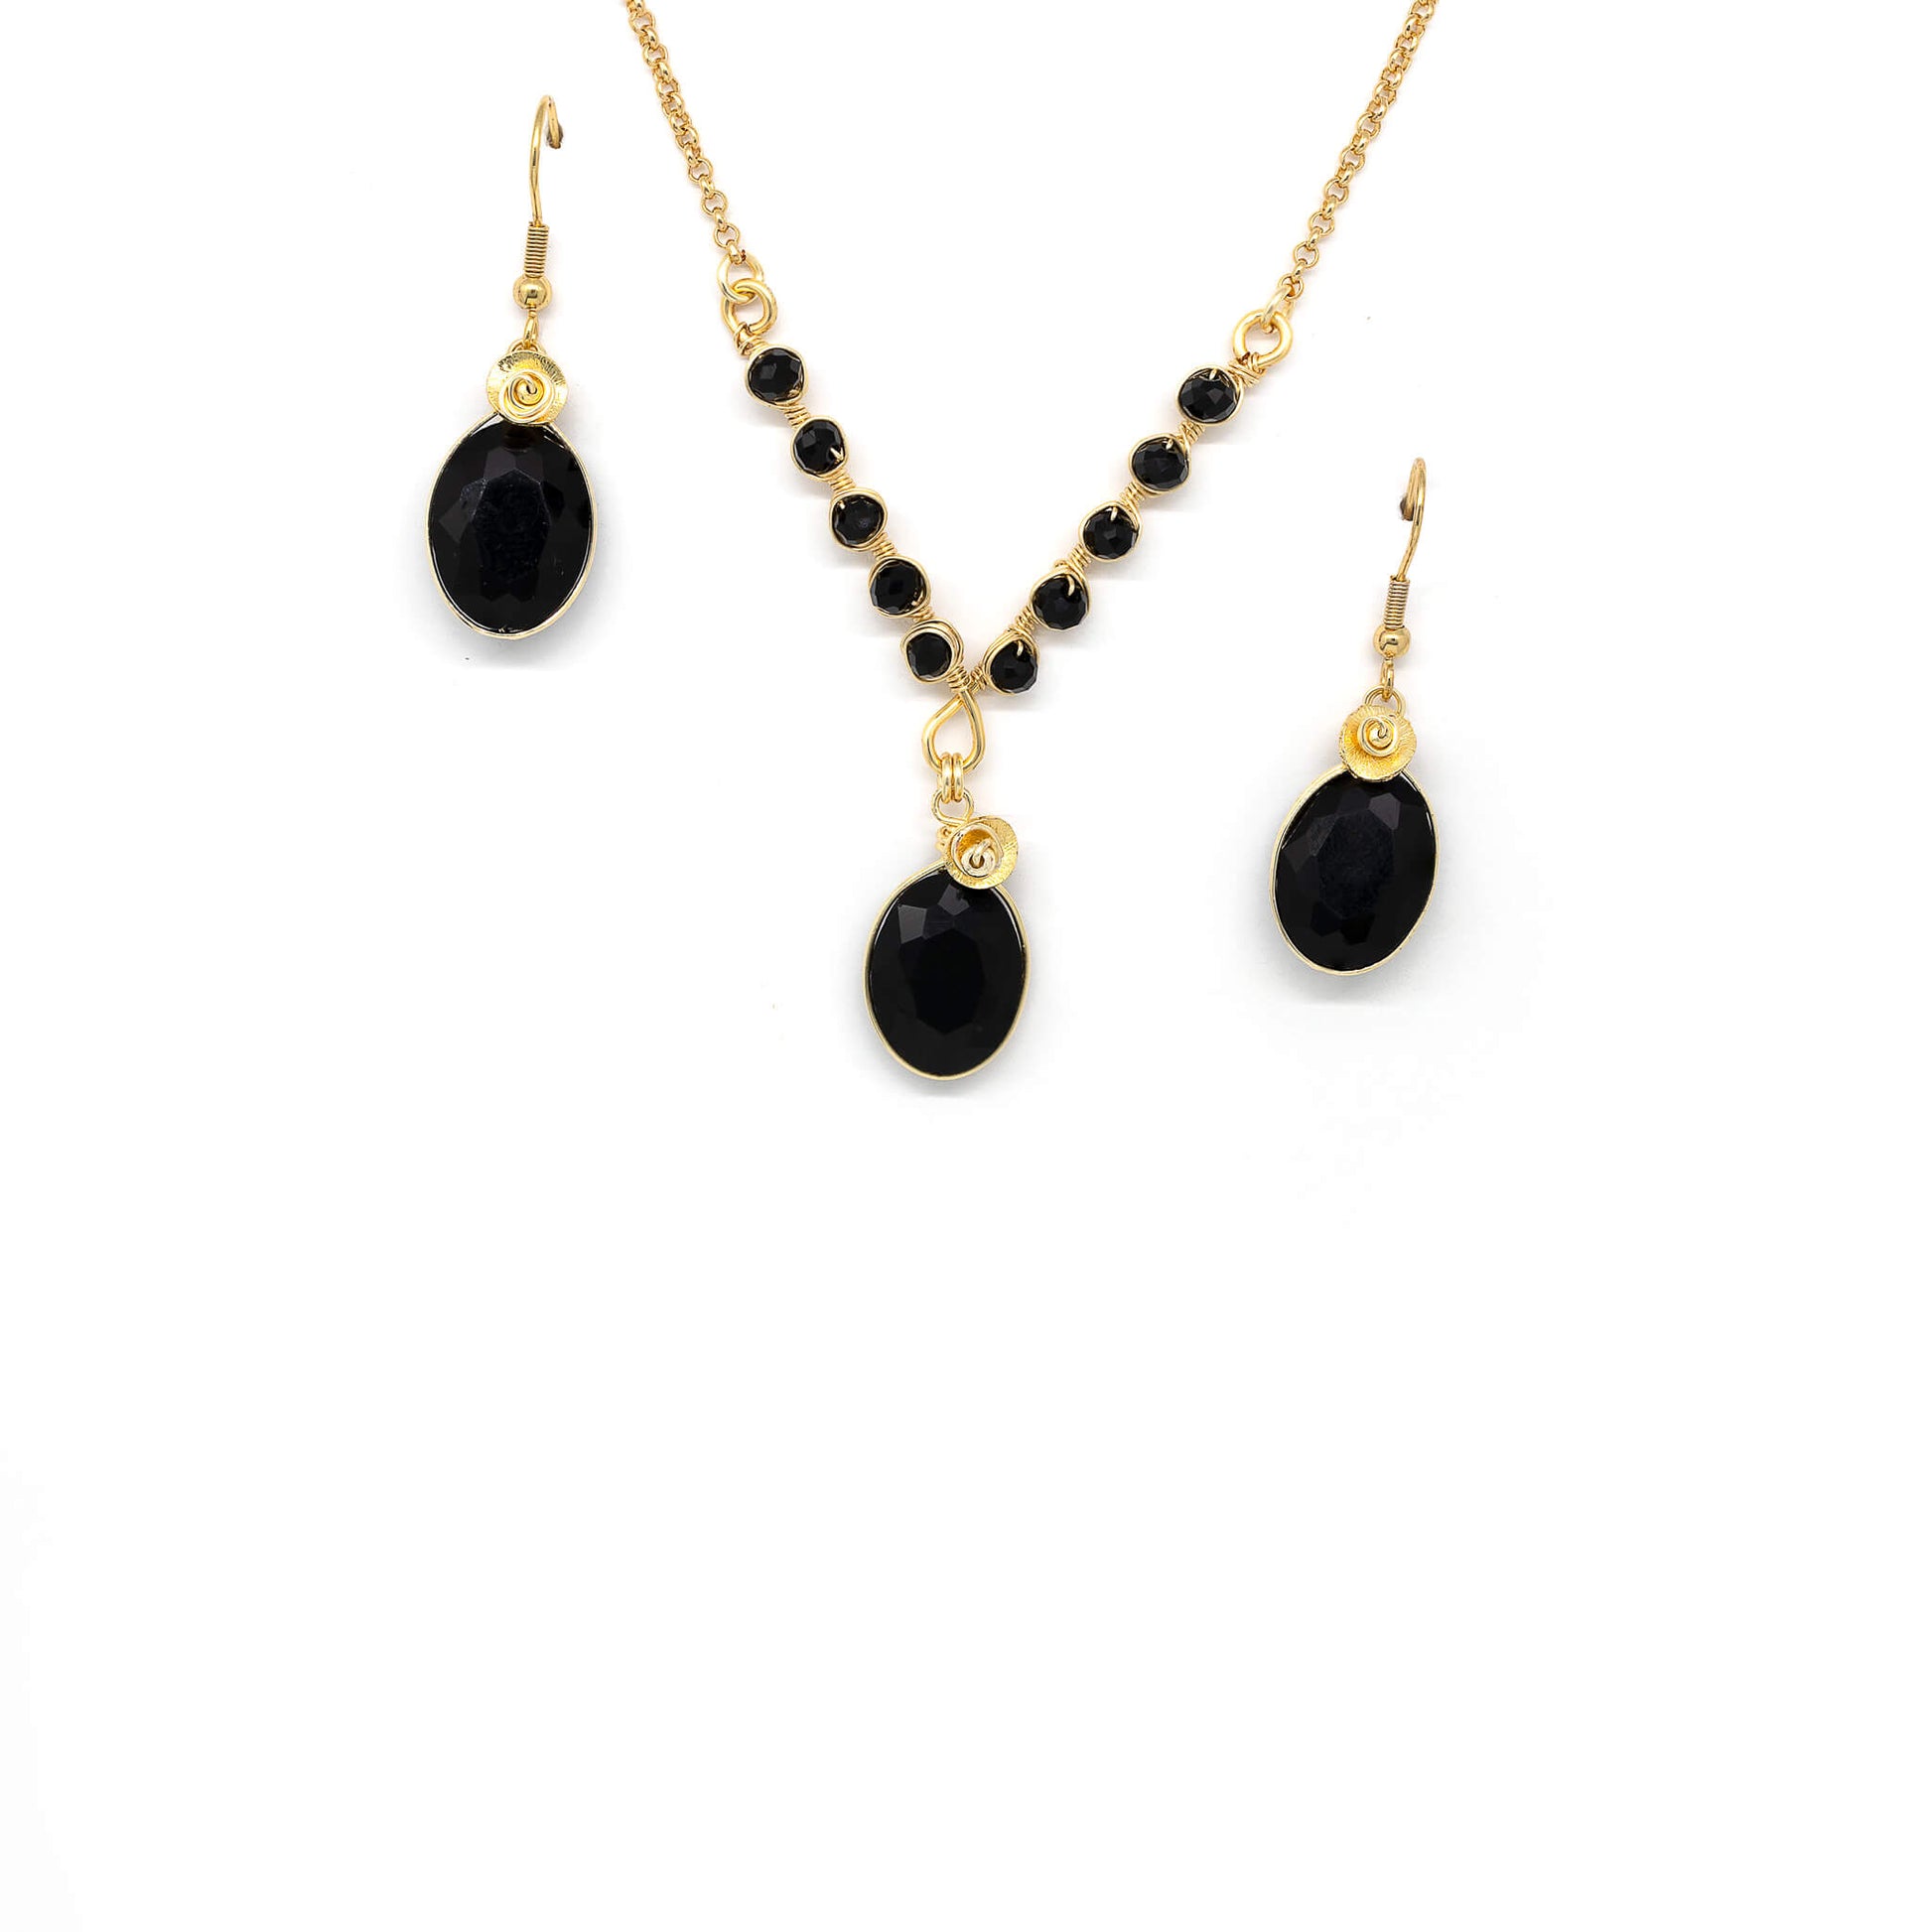 Victoria Necklace/Earrings Set. Black and Gold Set. Feature 16 inches with 2 inches extender 22K Gold Plated Chain, gold plated wire, and sparkling crystal beads. Handmade.